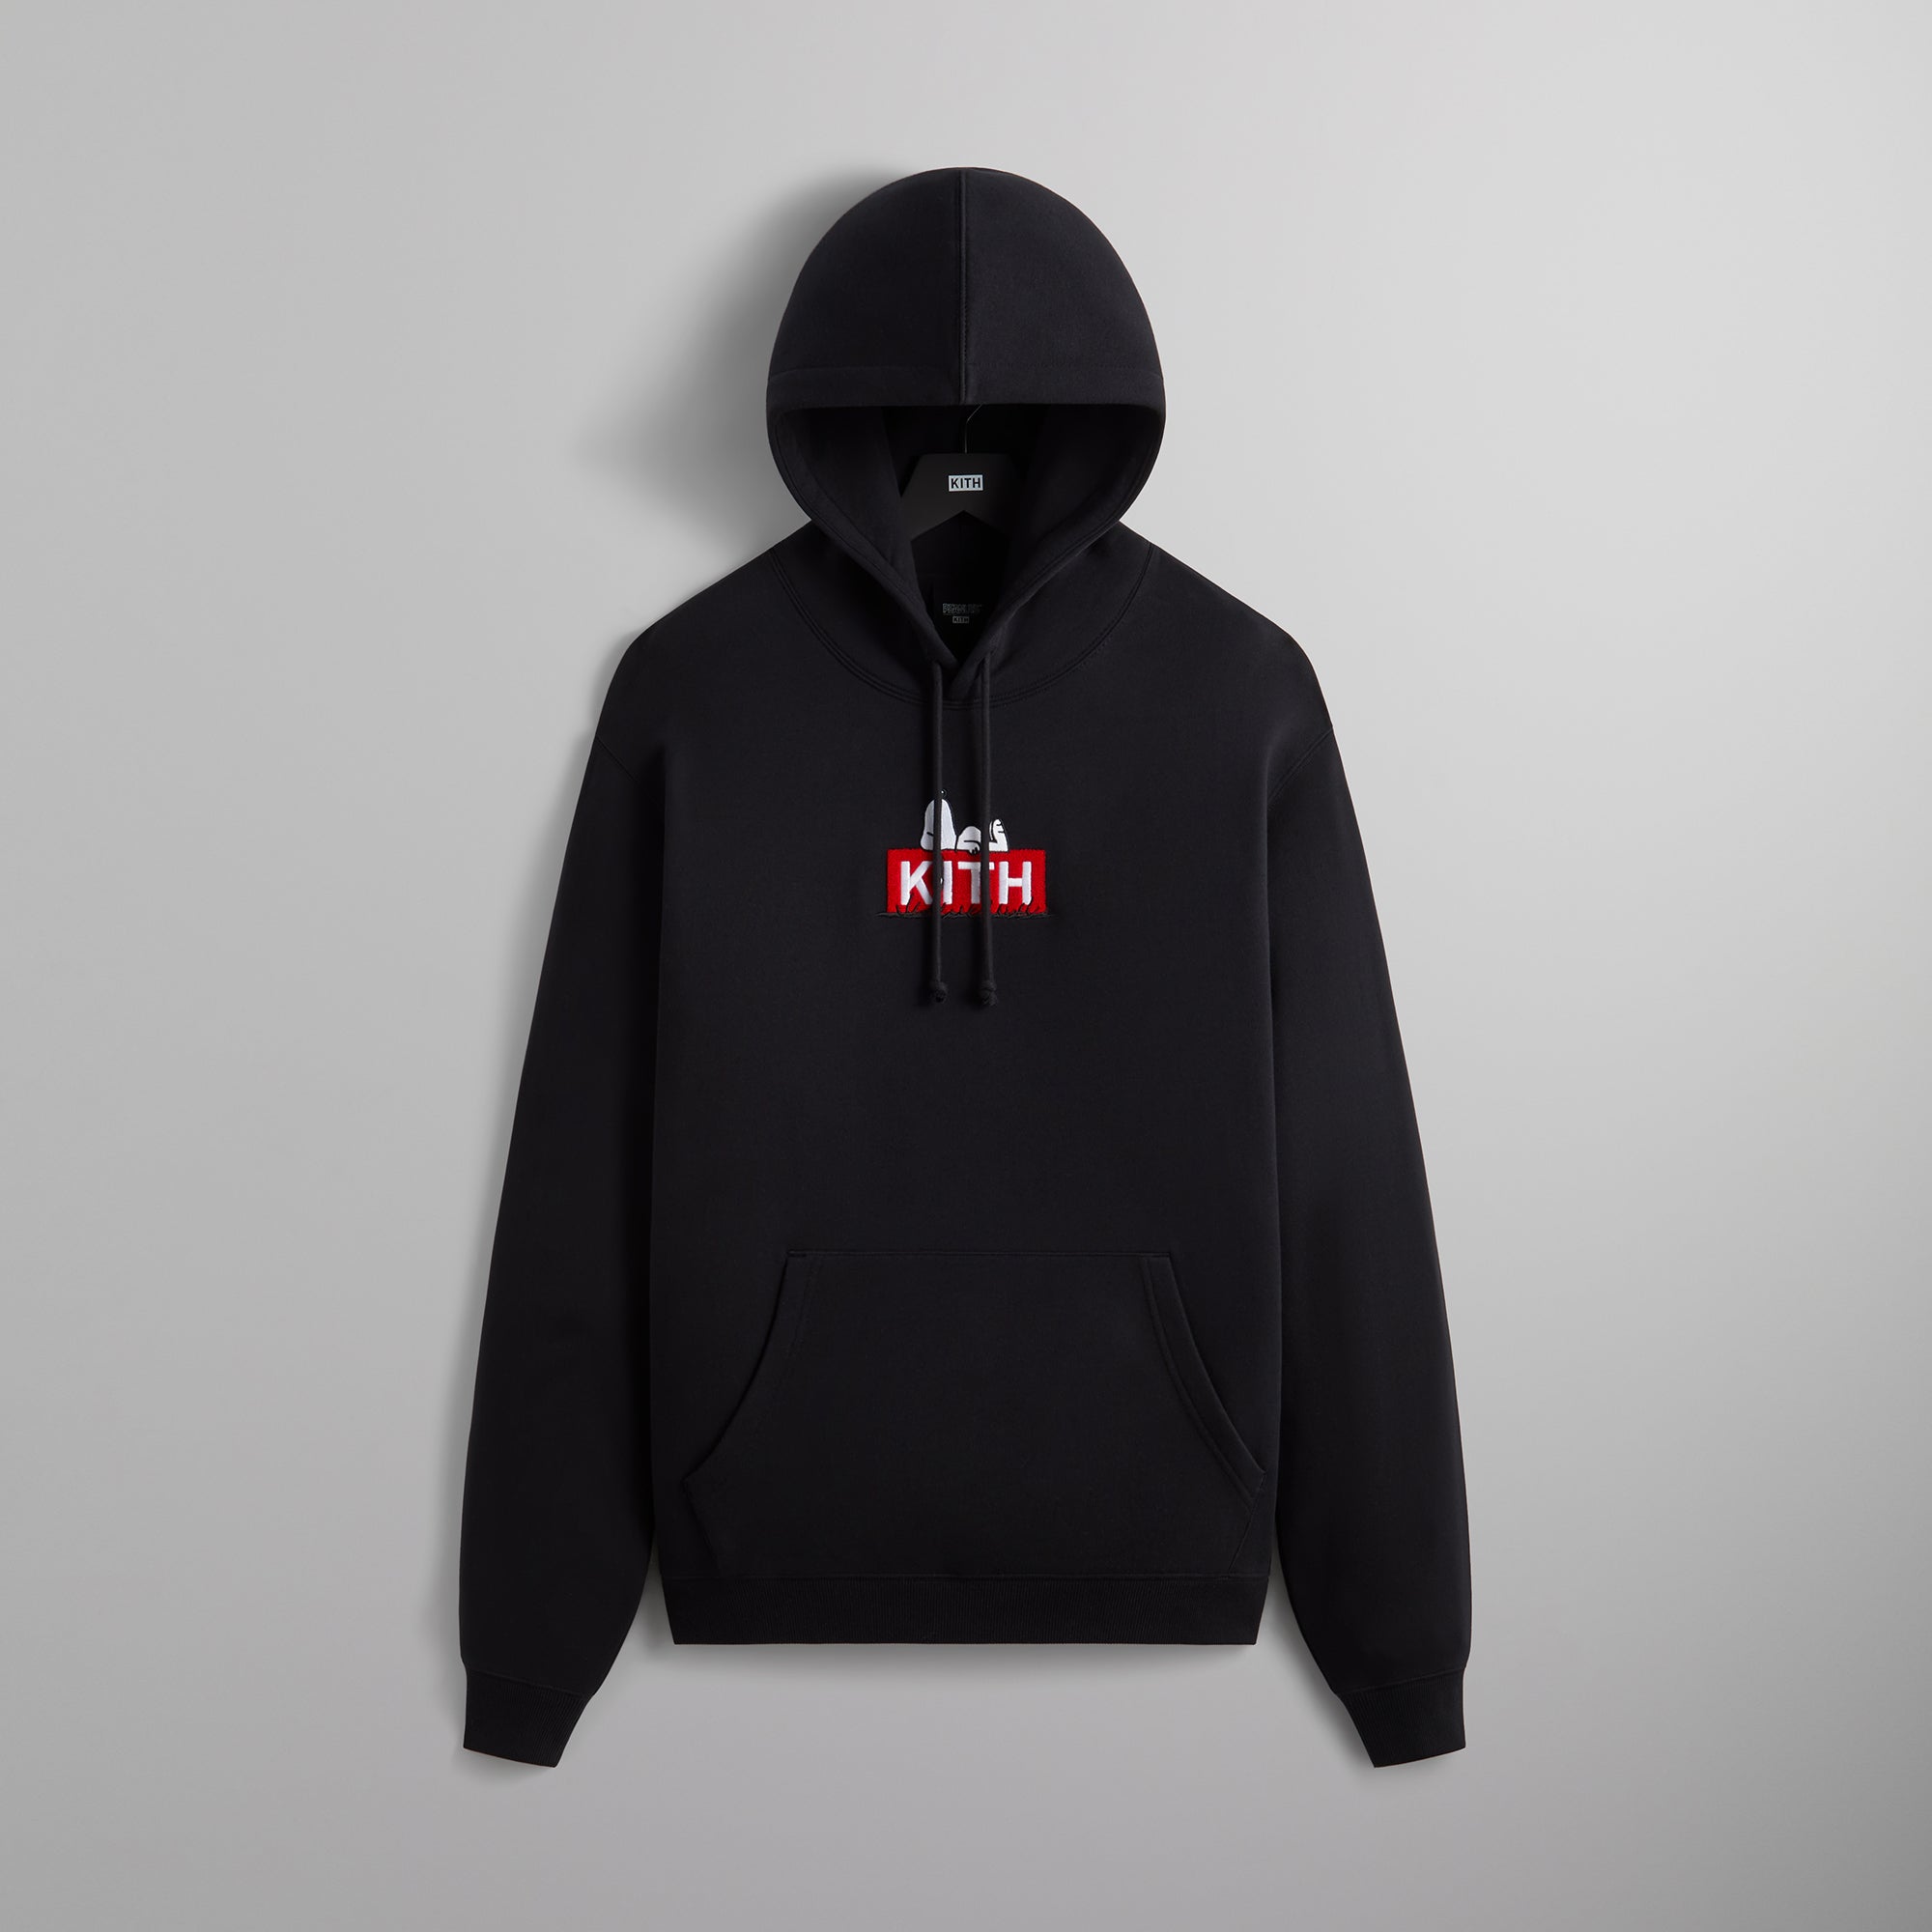 Kith for Peanuts Doghouse Hoodie - Black PH